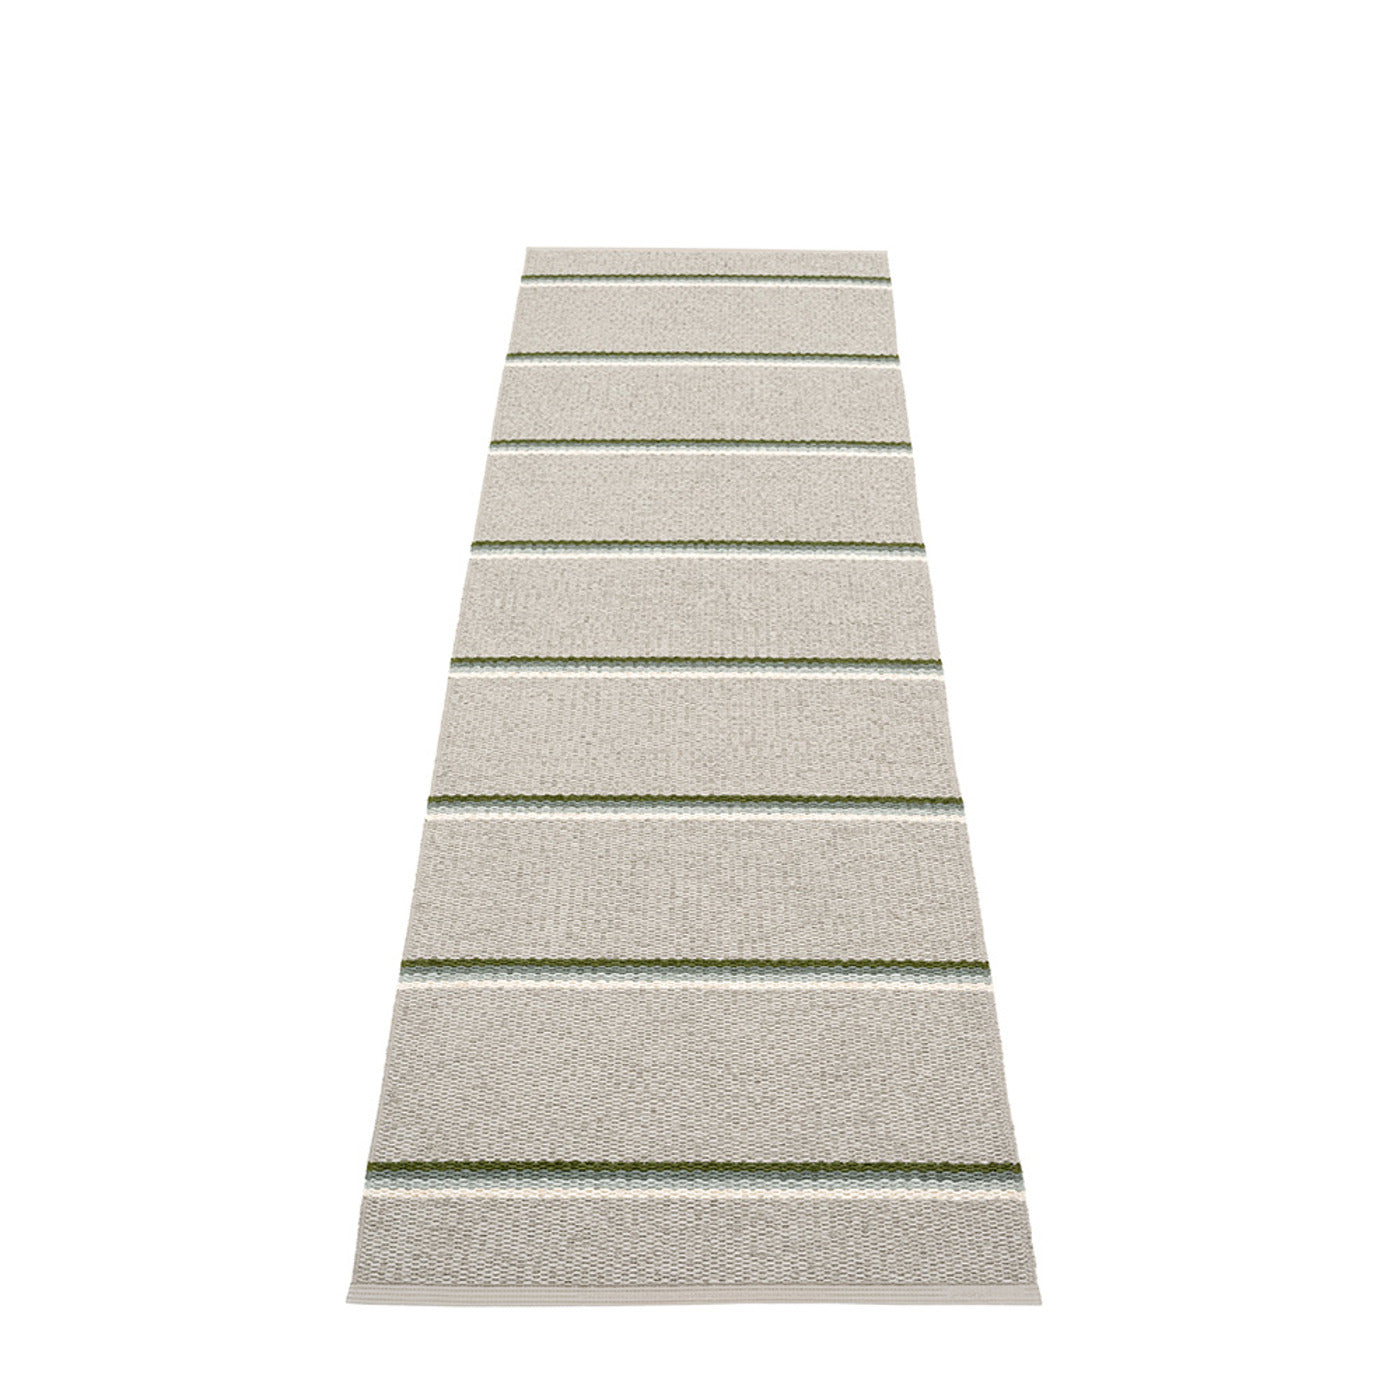 All sizes OLLE RUG - Green